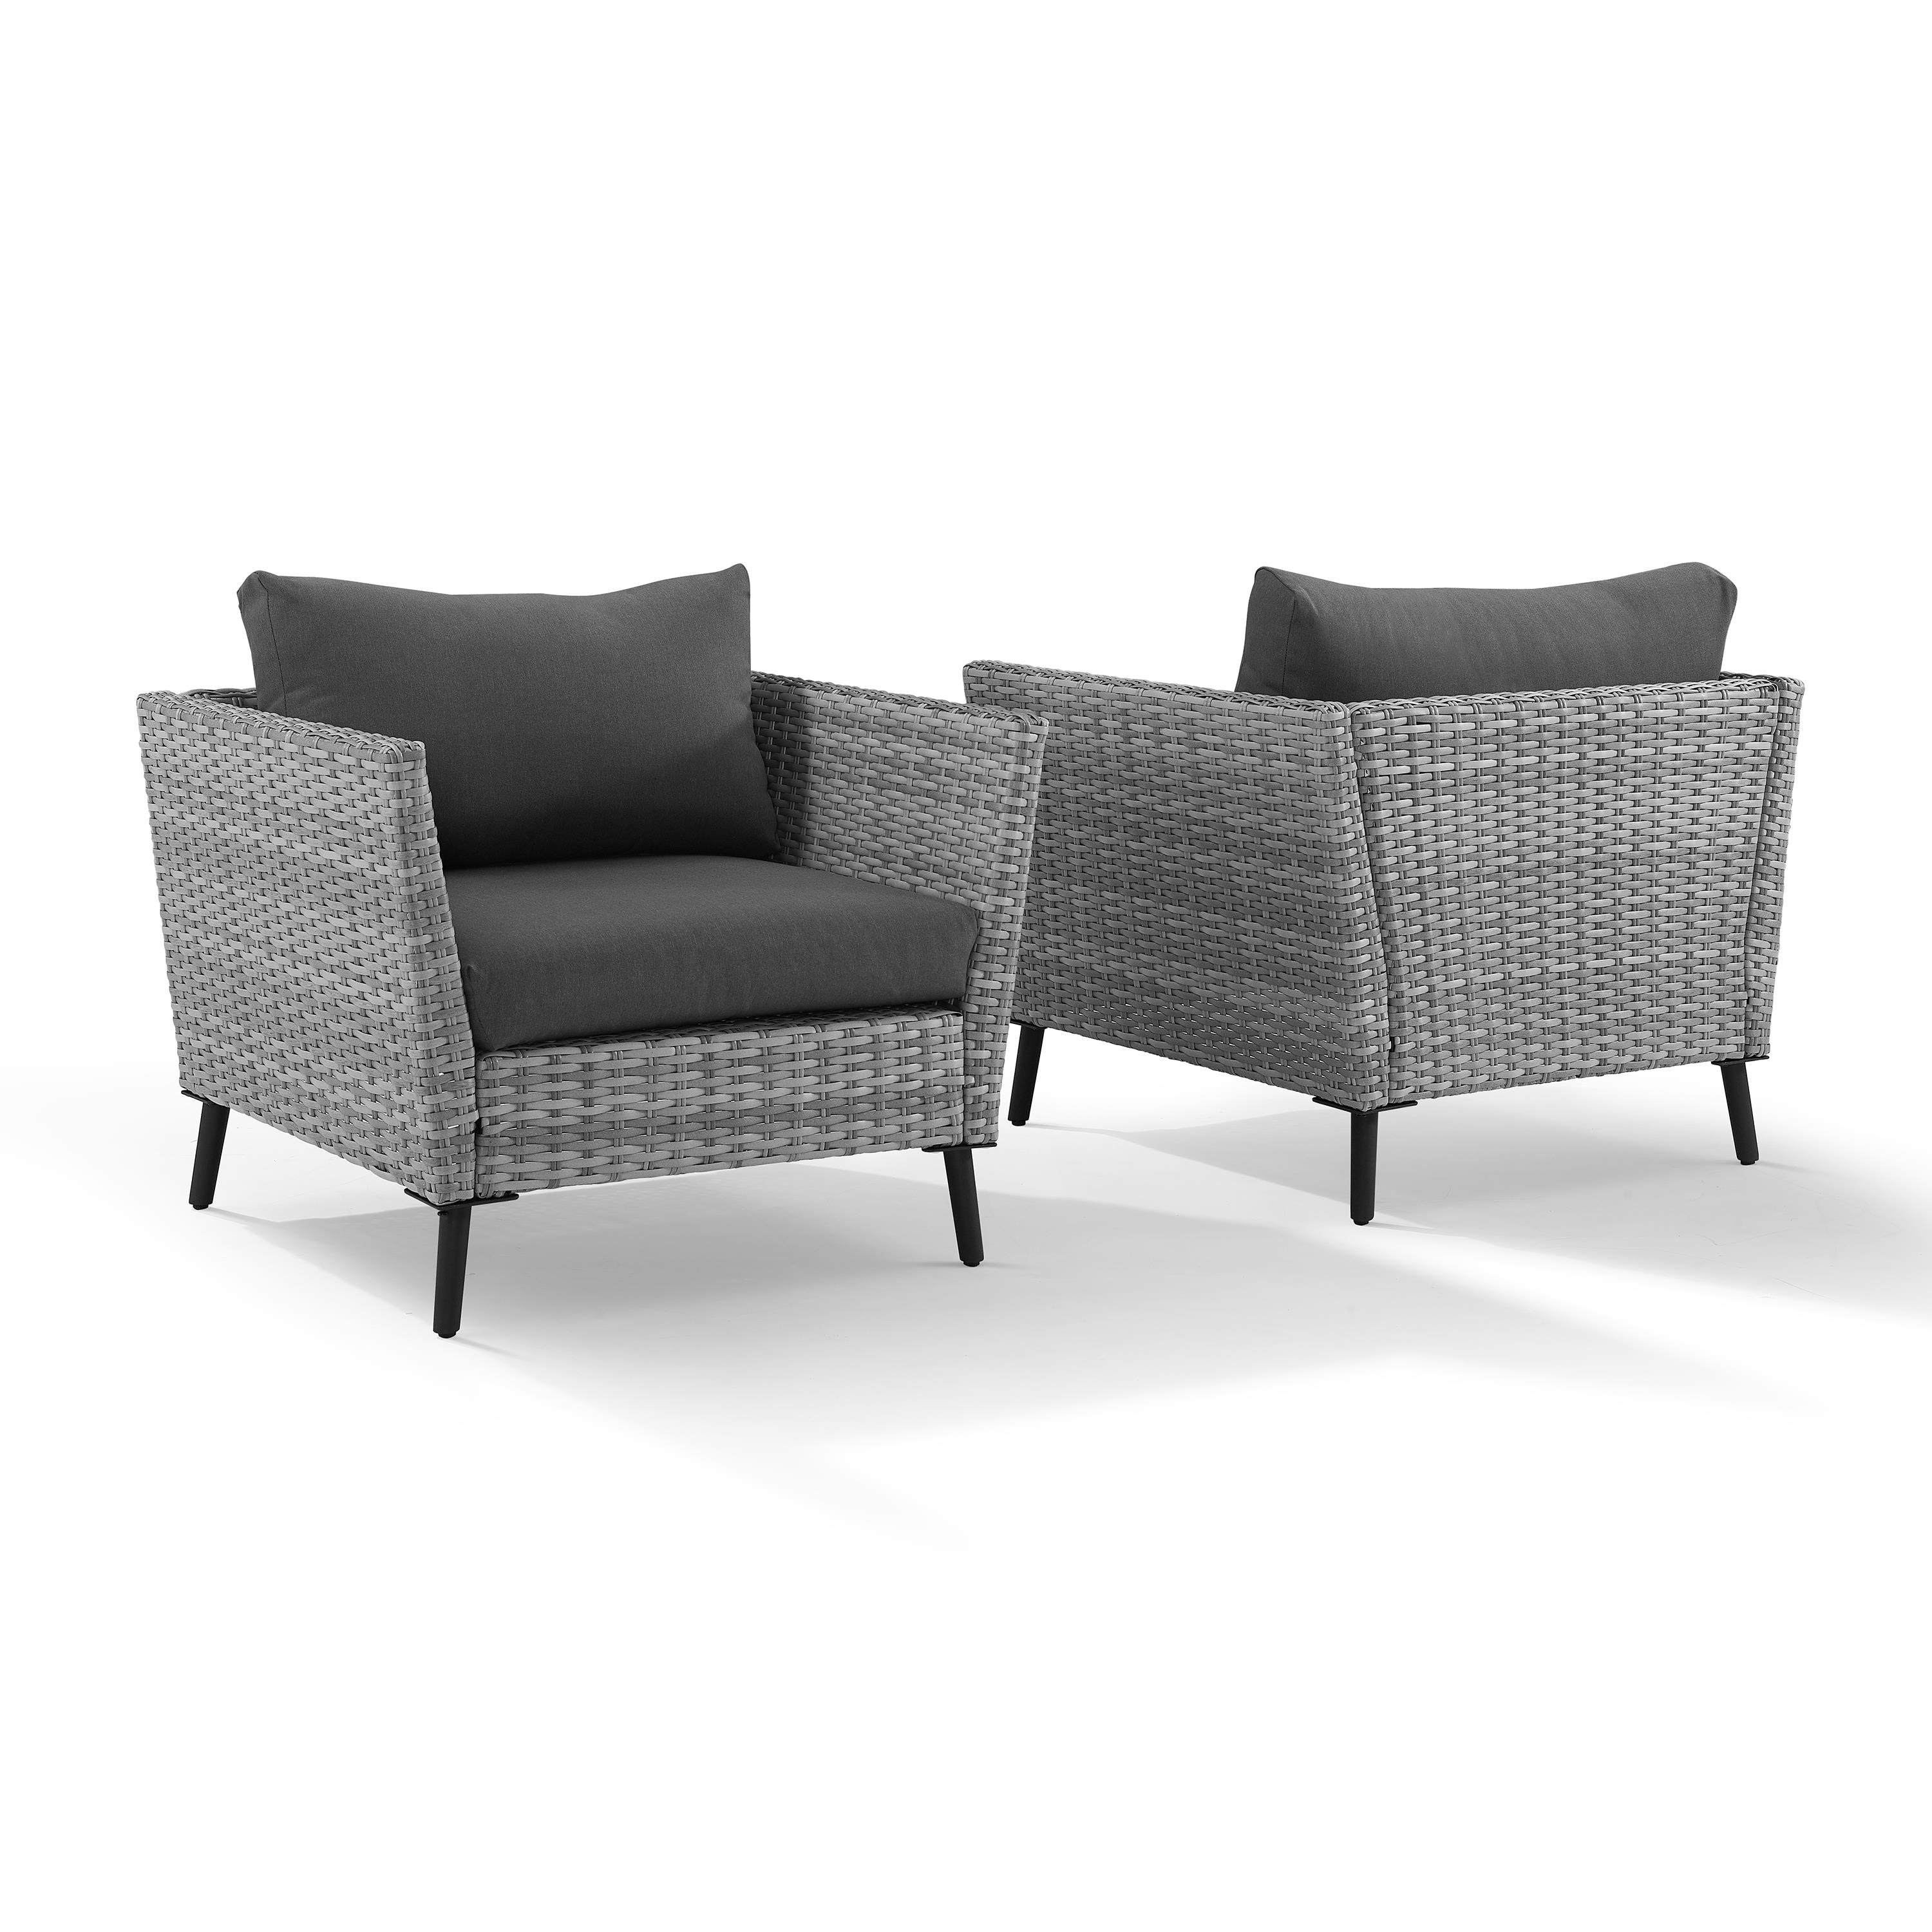 Crosley Richland Wicker Patio Arm Chair in Gray (Set of 2) - image 3 of 10